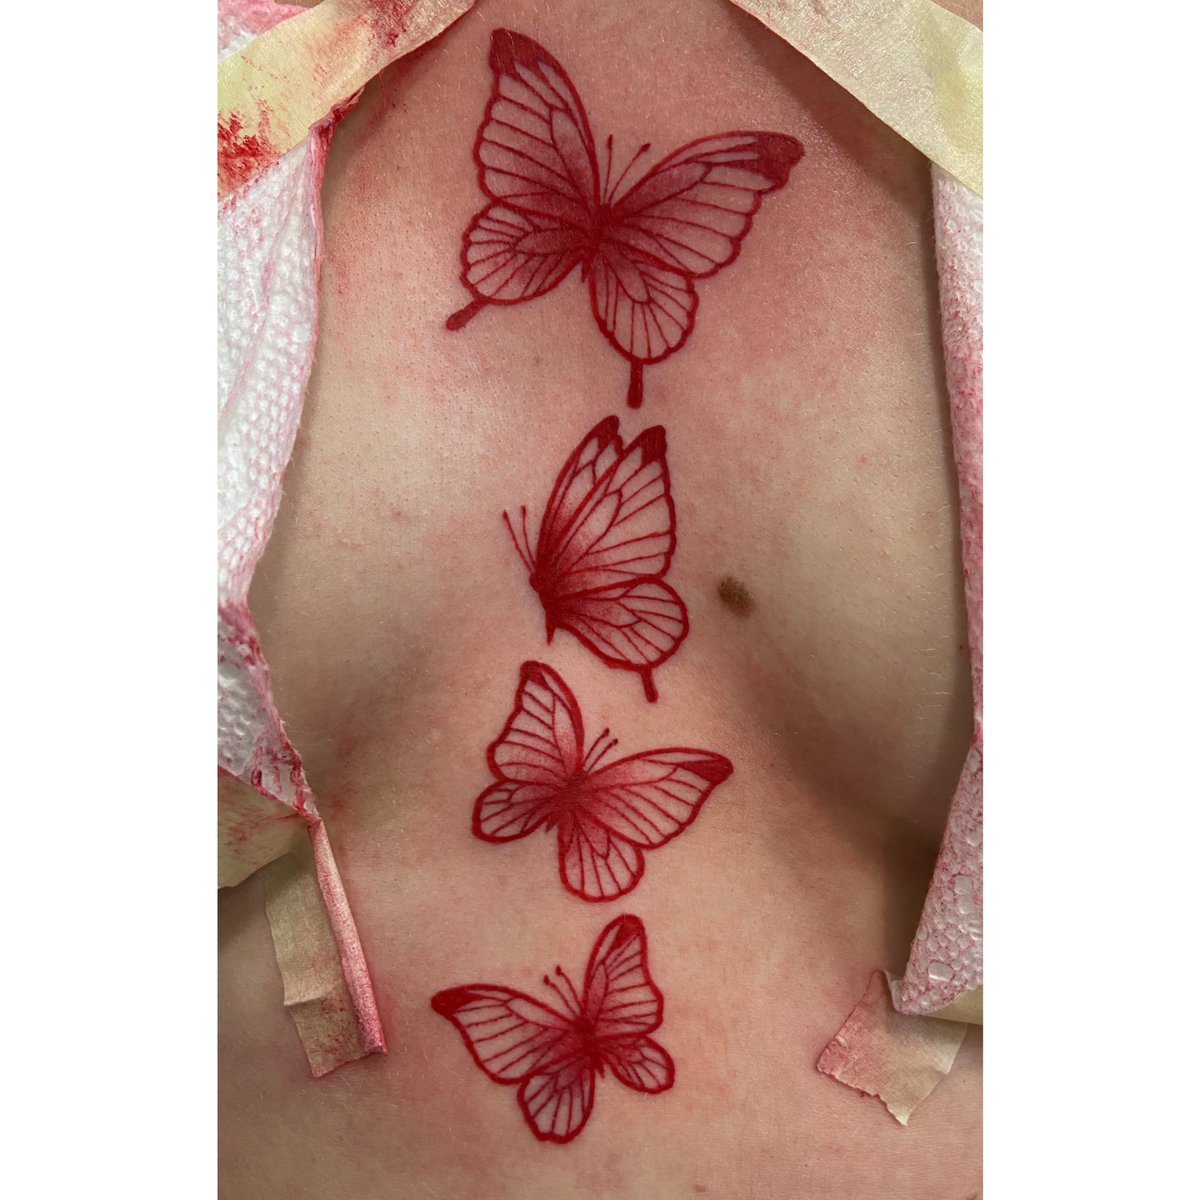 10 Best Butterfly Sternum Tattoo DesignsCollected By Daily Hind News   Daily Hind News